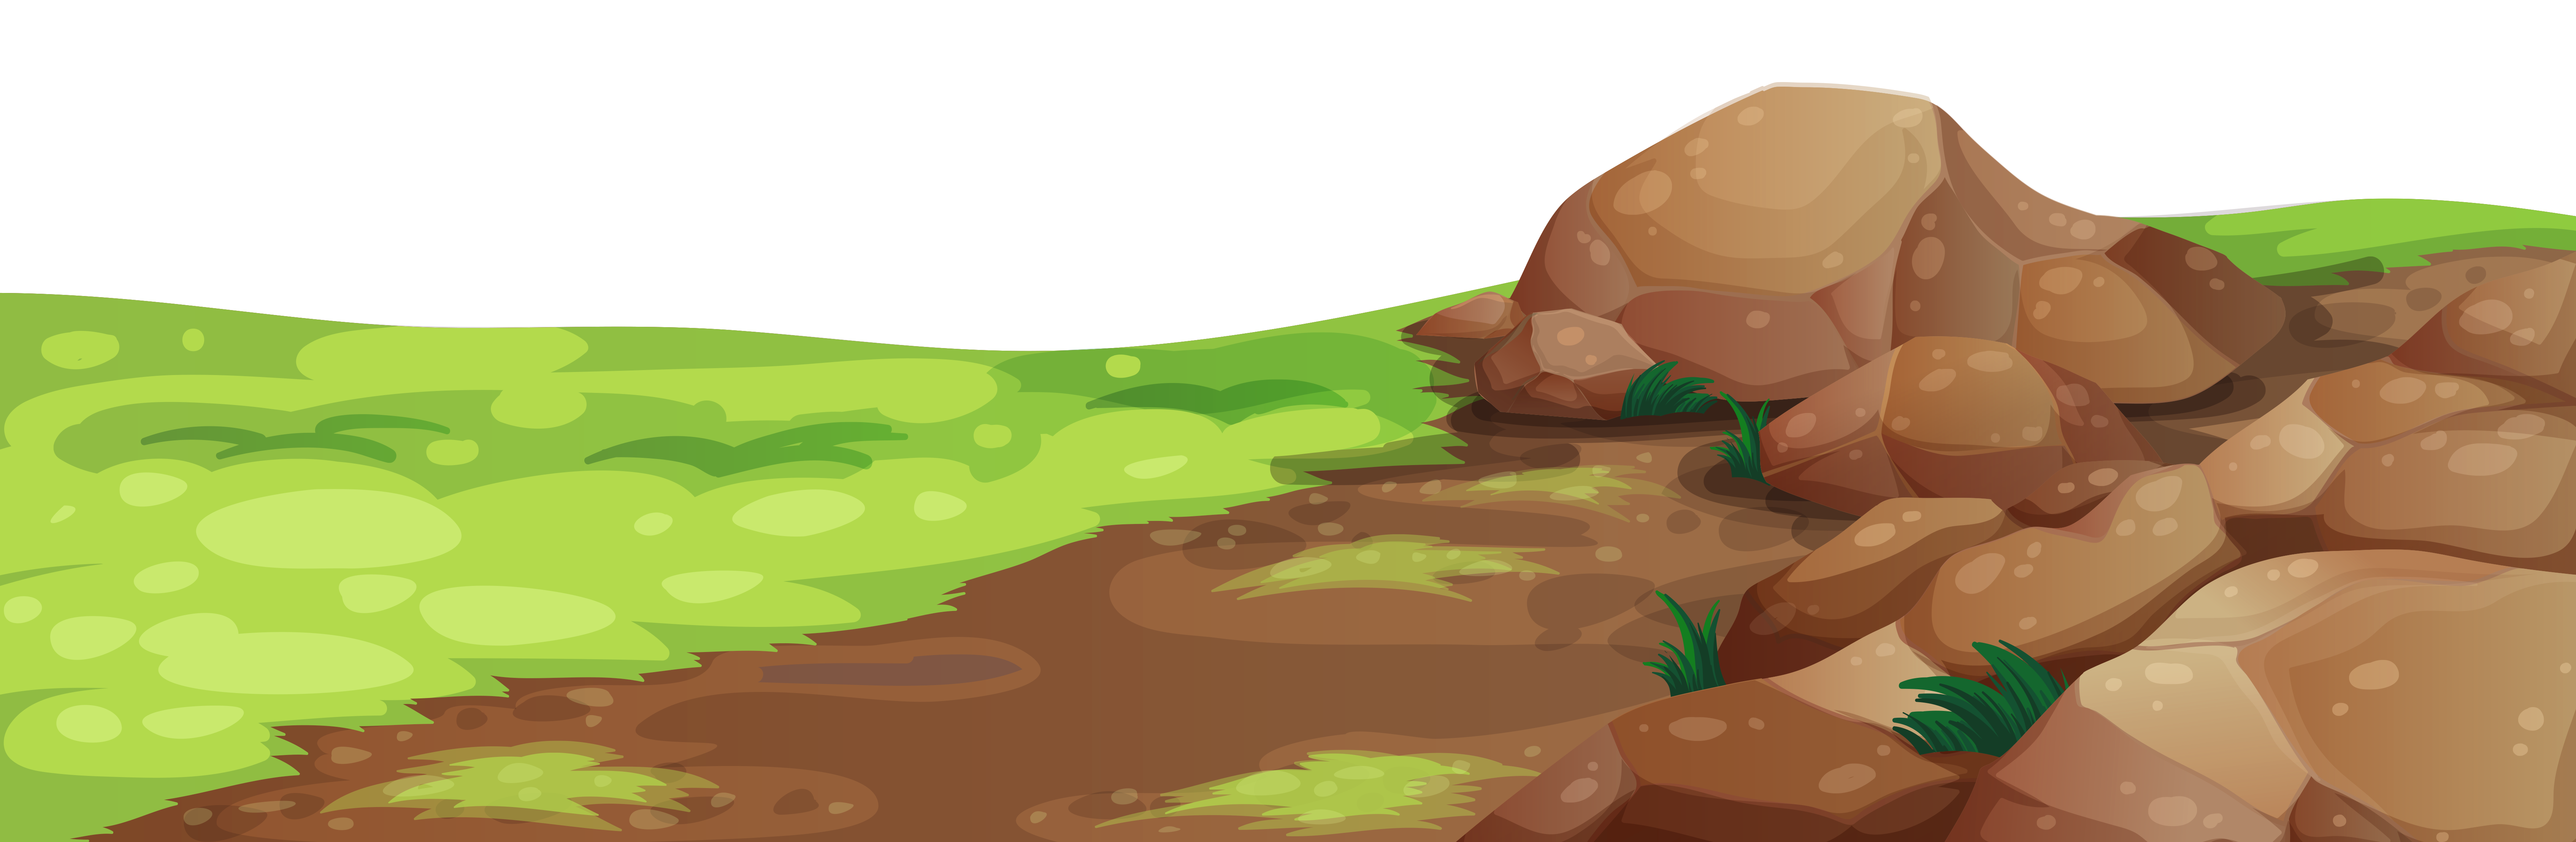 Grass and stones png. Hill clipart ground